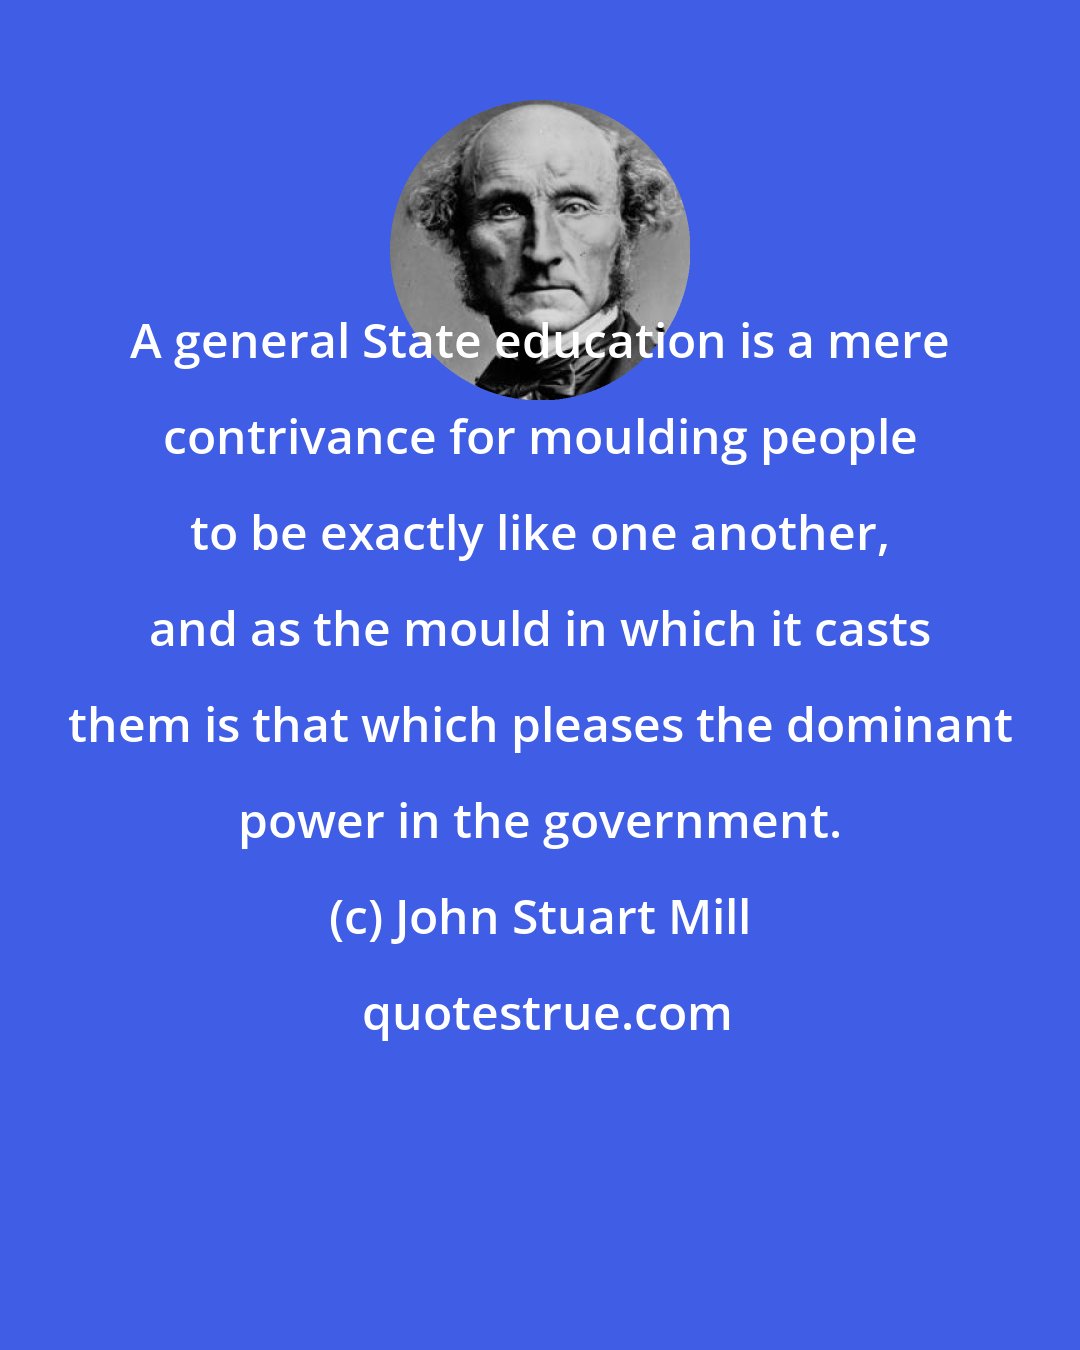 John Stuart Mill: A general State education is a mere contrivance for moulding people to be exactly like one another, and as the mould in which it casts them is that which pleases the dominant power in the government.